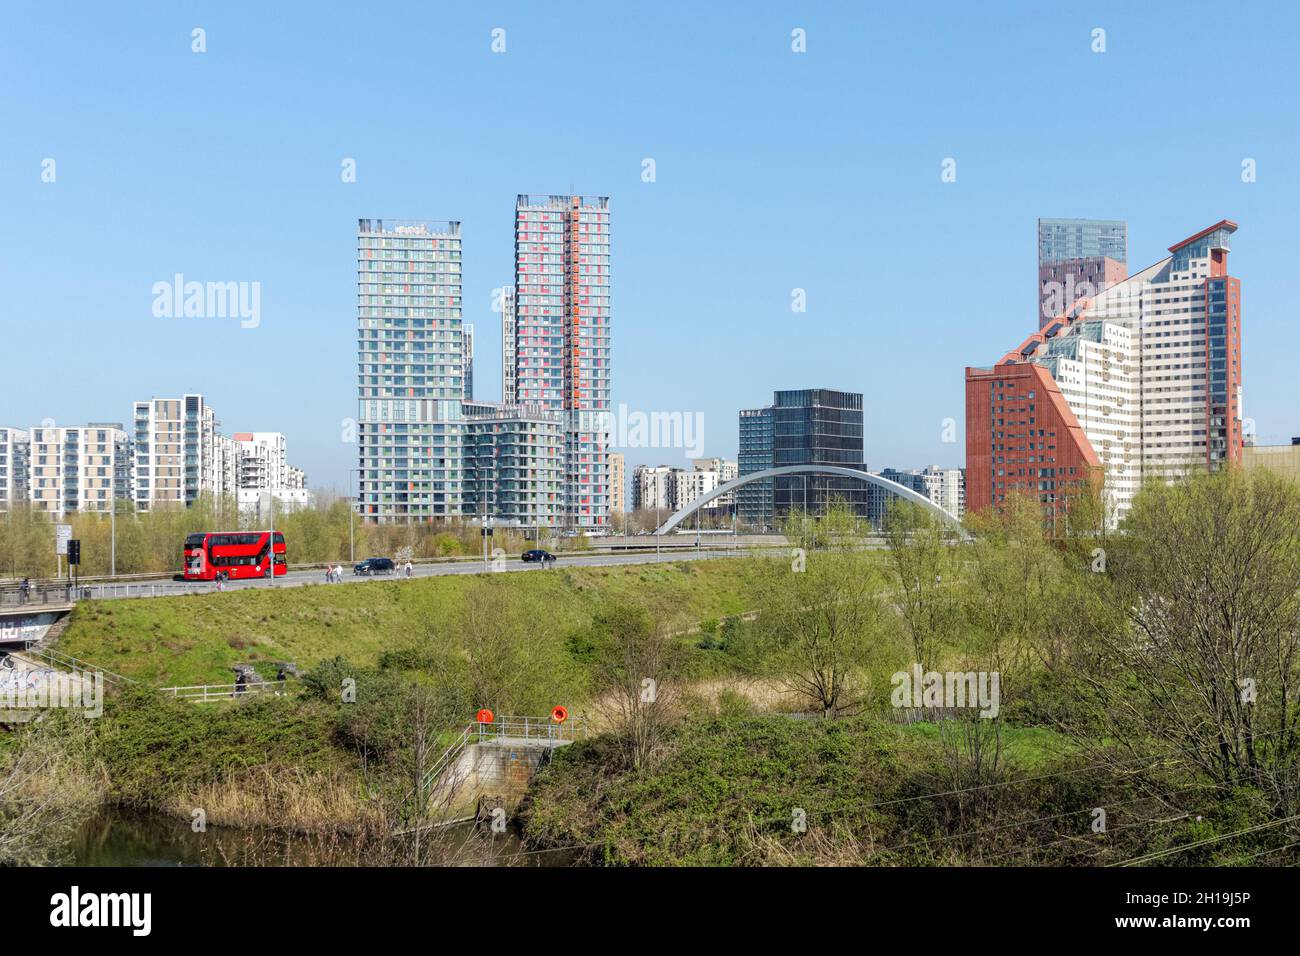 Residential buildings in East Village (left) and student accommodation building Stratford One (right) at Stratford, London England United Kingdom UK Stock Photo